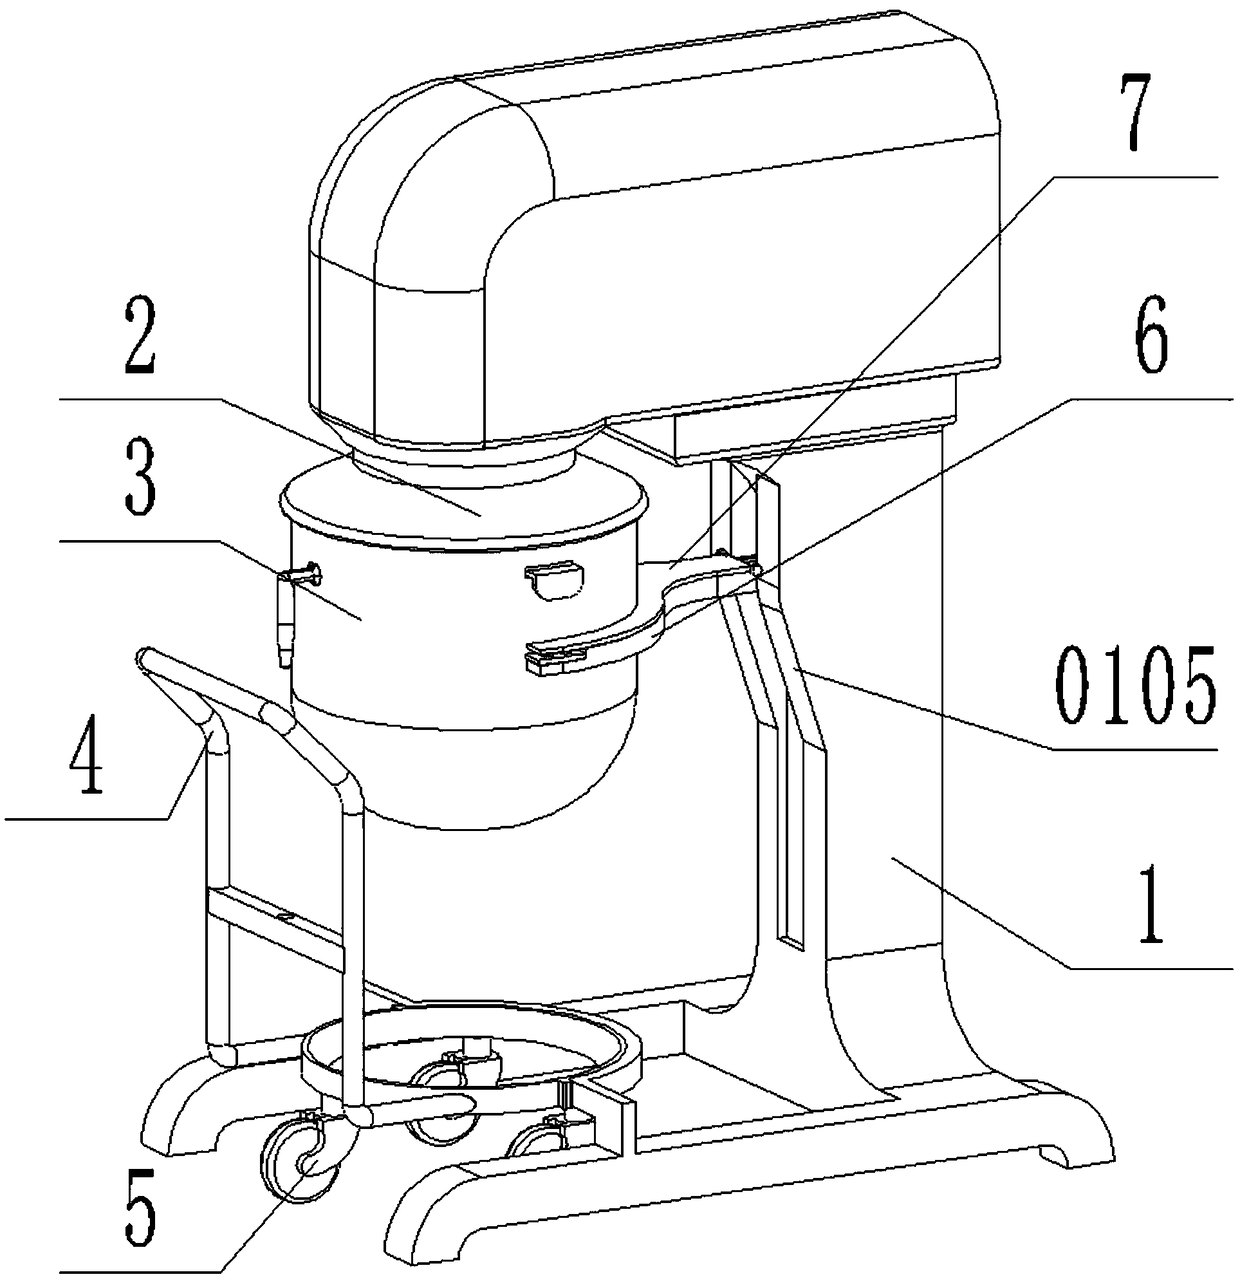 Dough mixer device for food processing